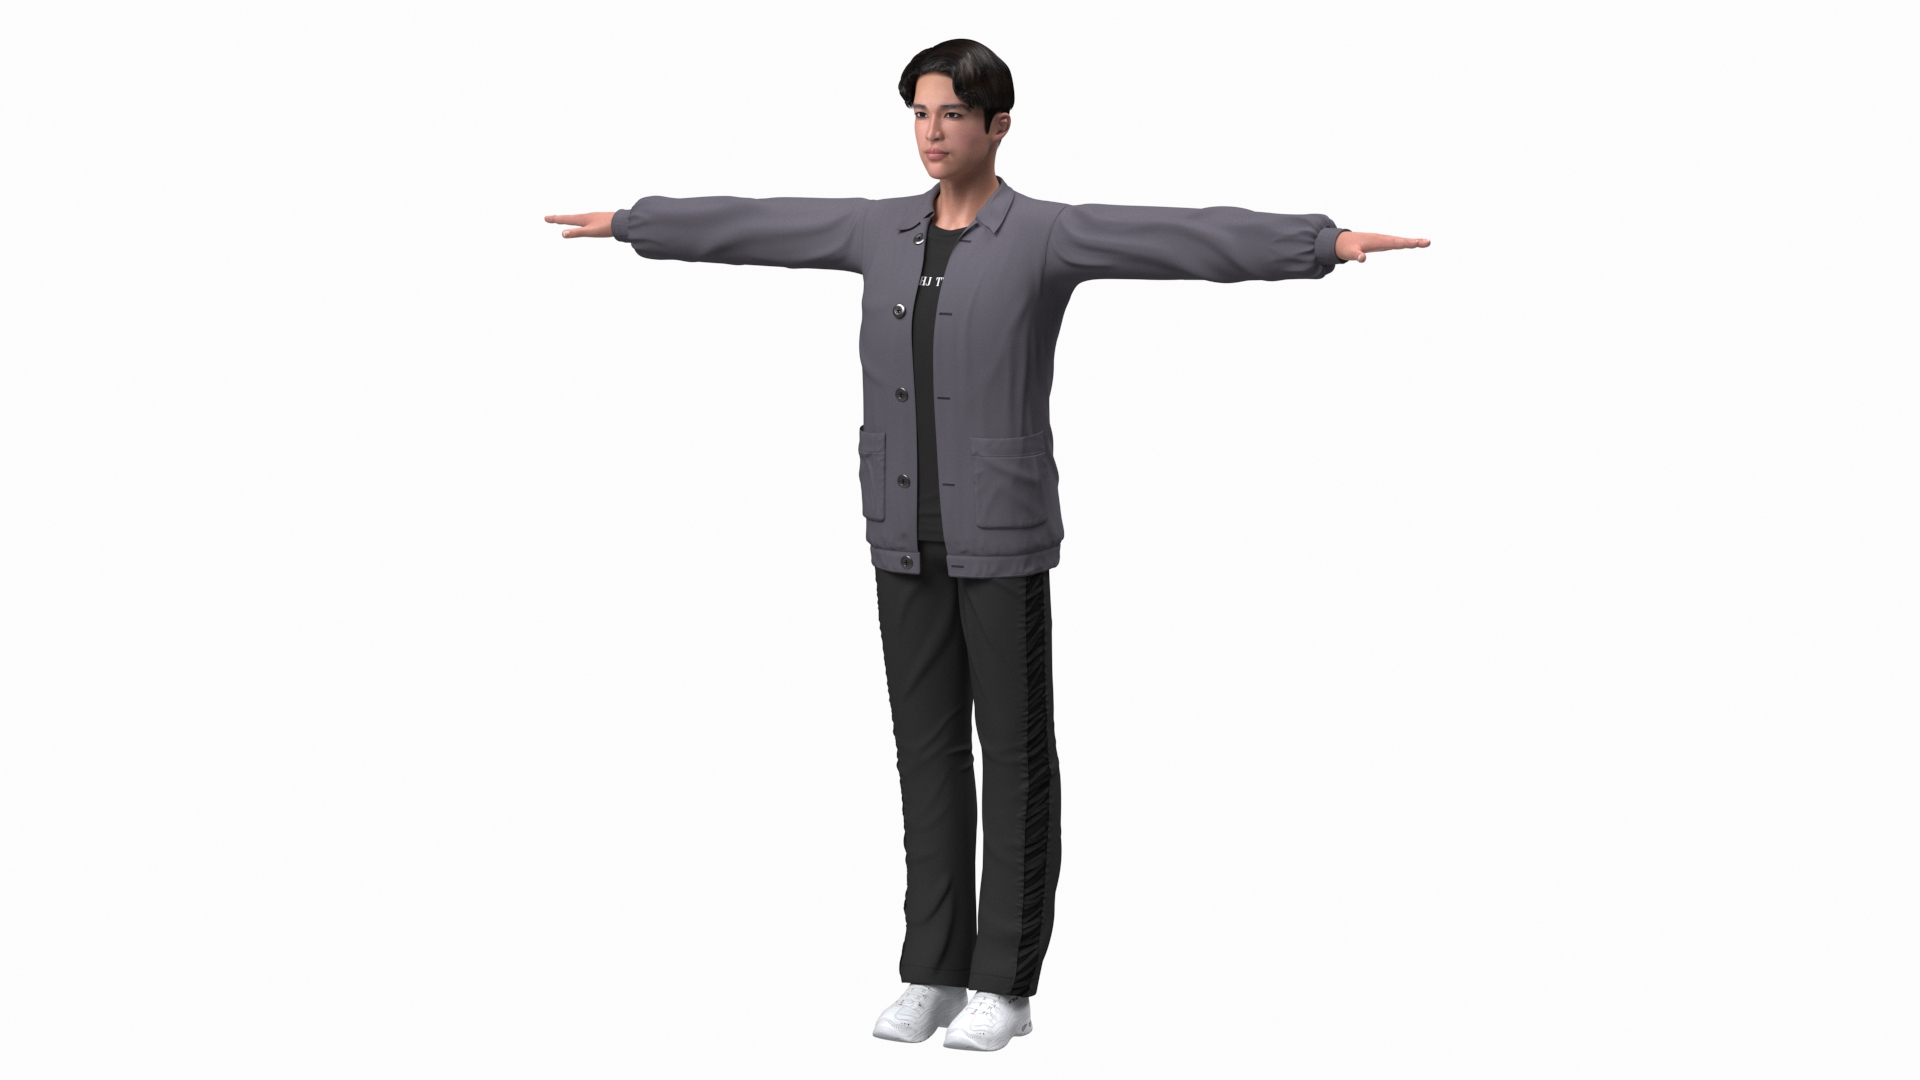 Using Universal T-pose Editing Feature